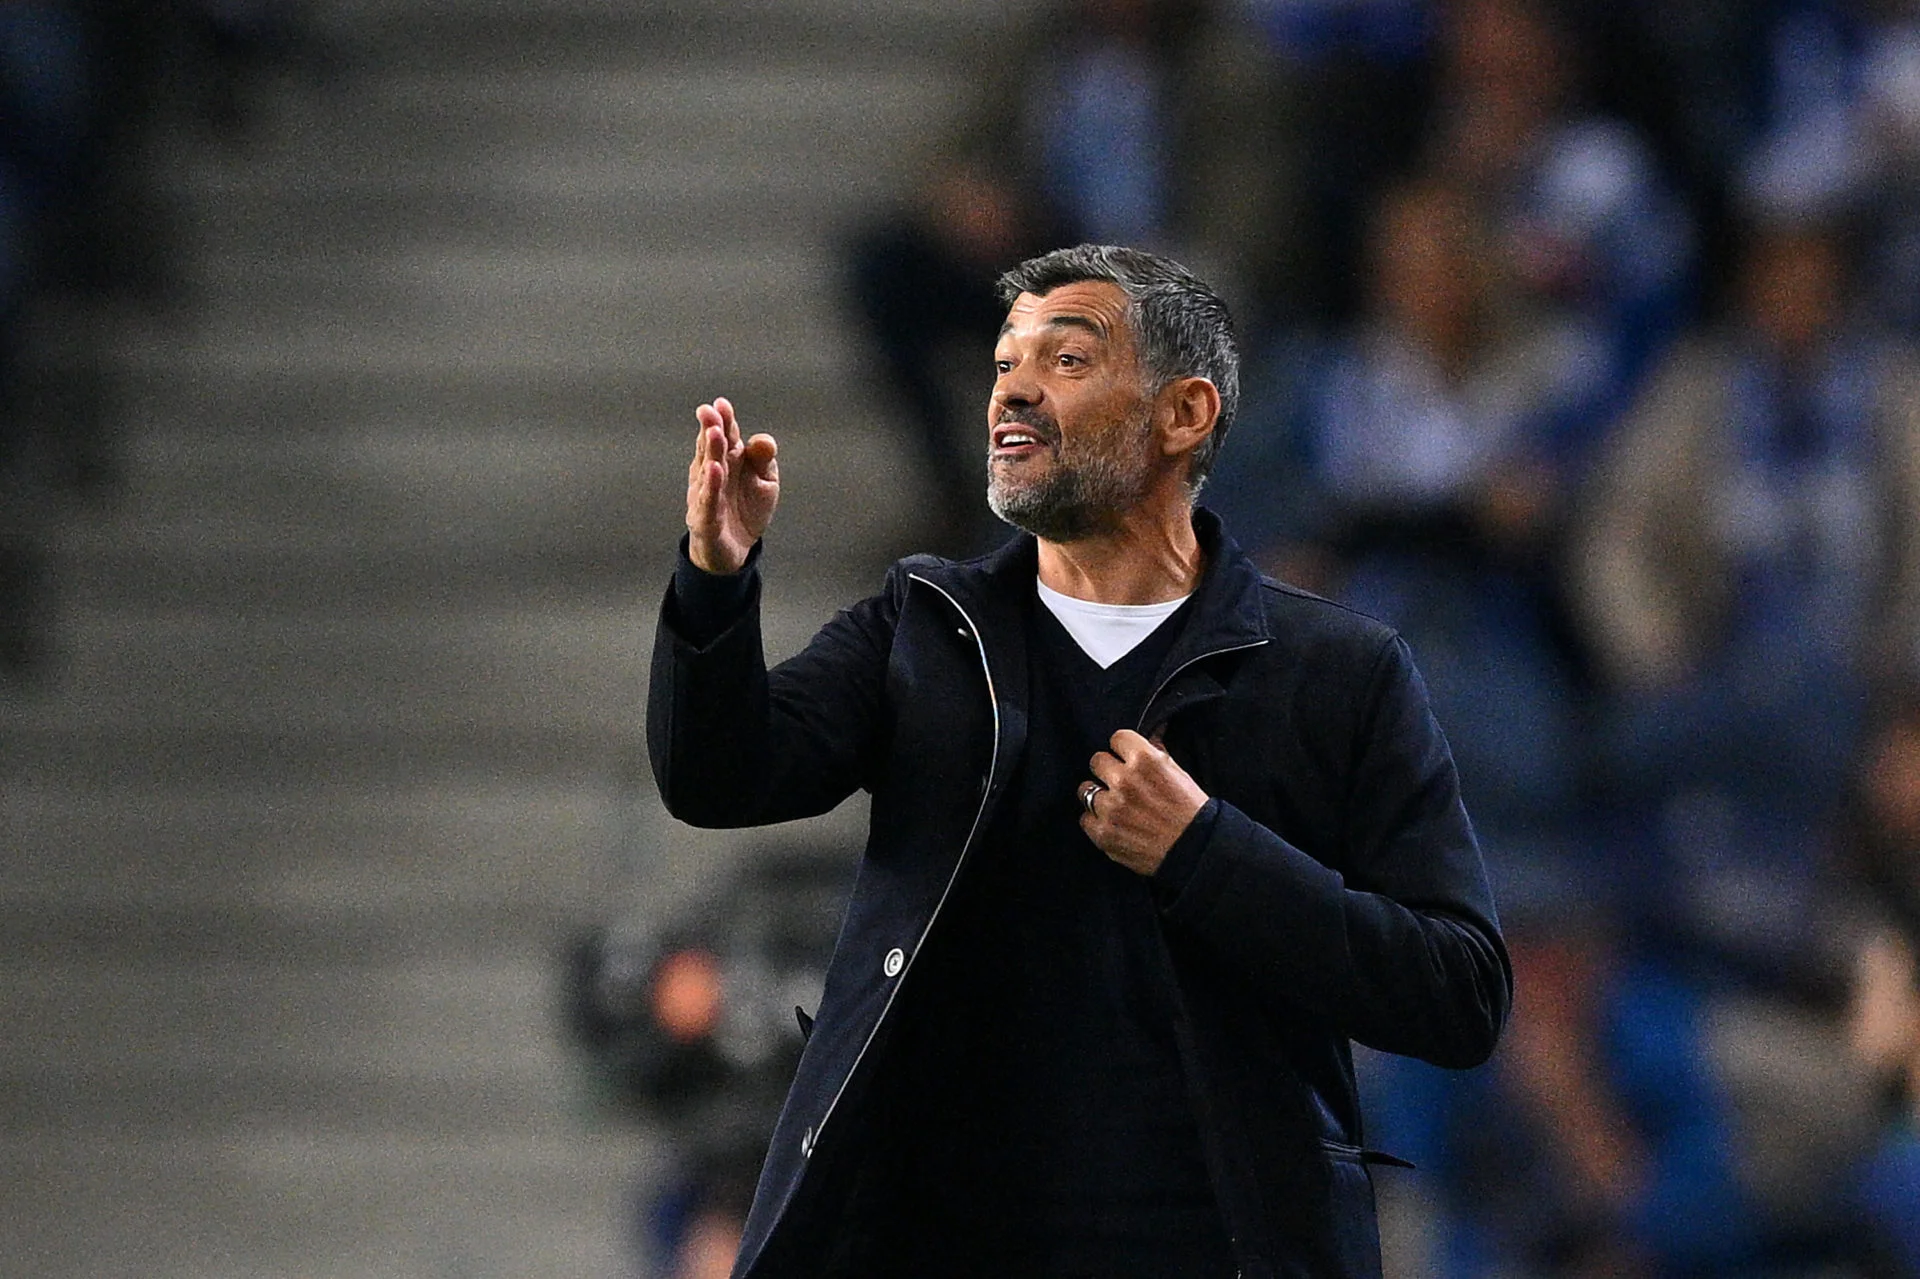 Milan will have to wait a few more weeks before learning whether Sergio Conceiçao will be their next coach following a summit with André Villas-Boas.